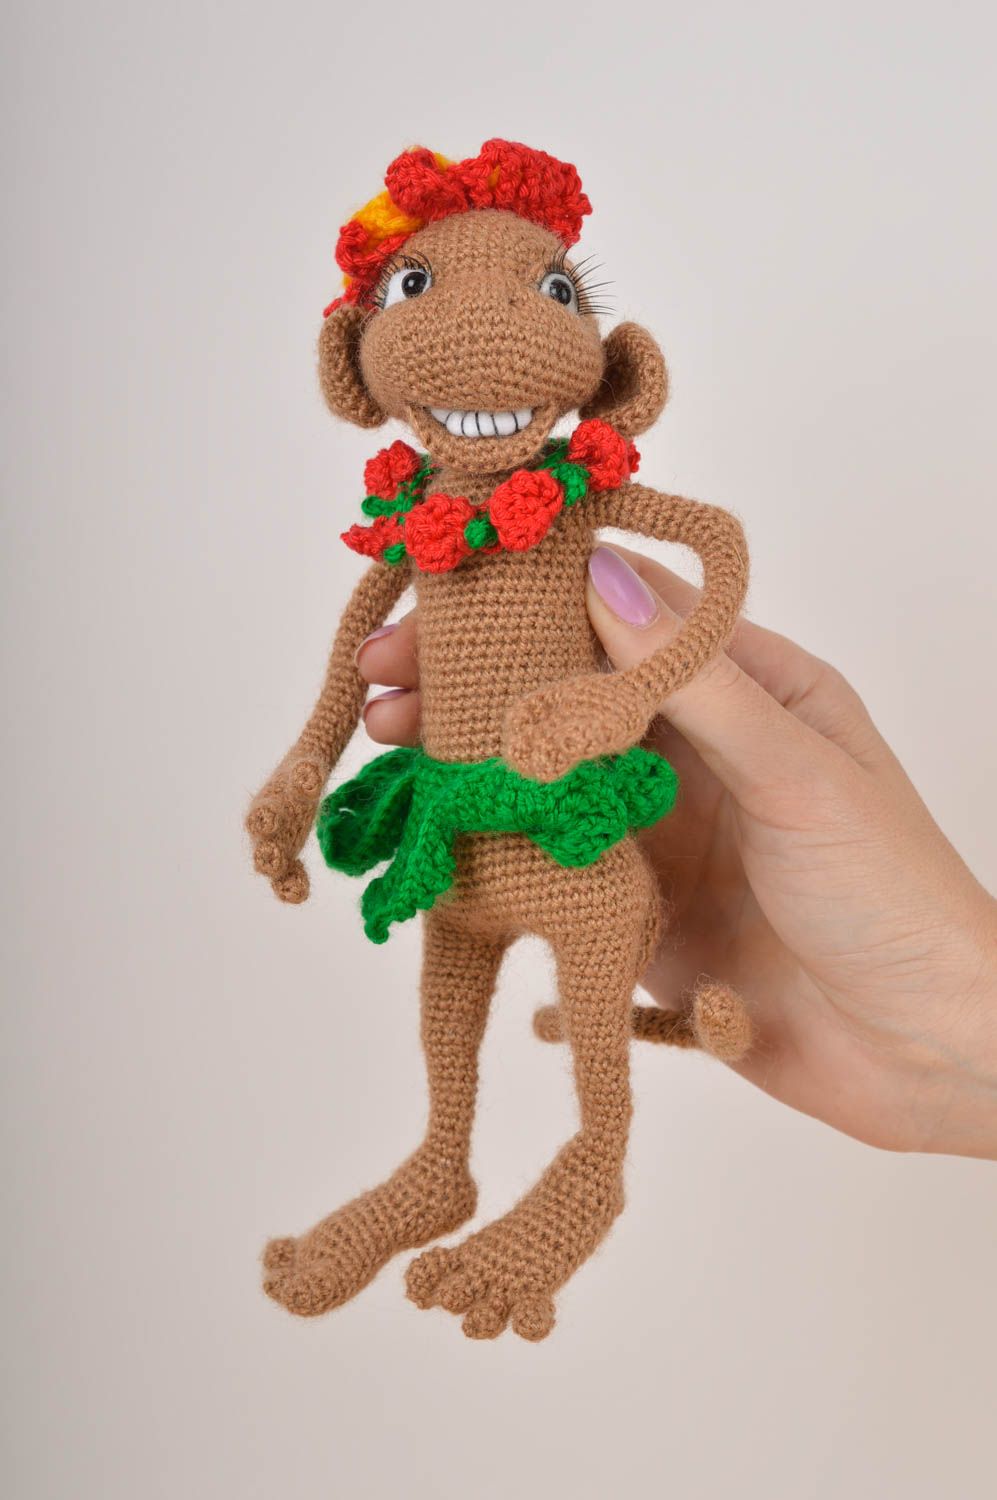 10 inches knitted stuffed monkey toy in brown, red, and green colors photo 5